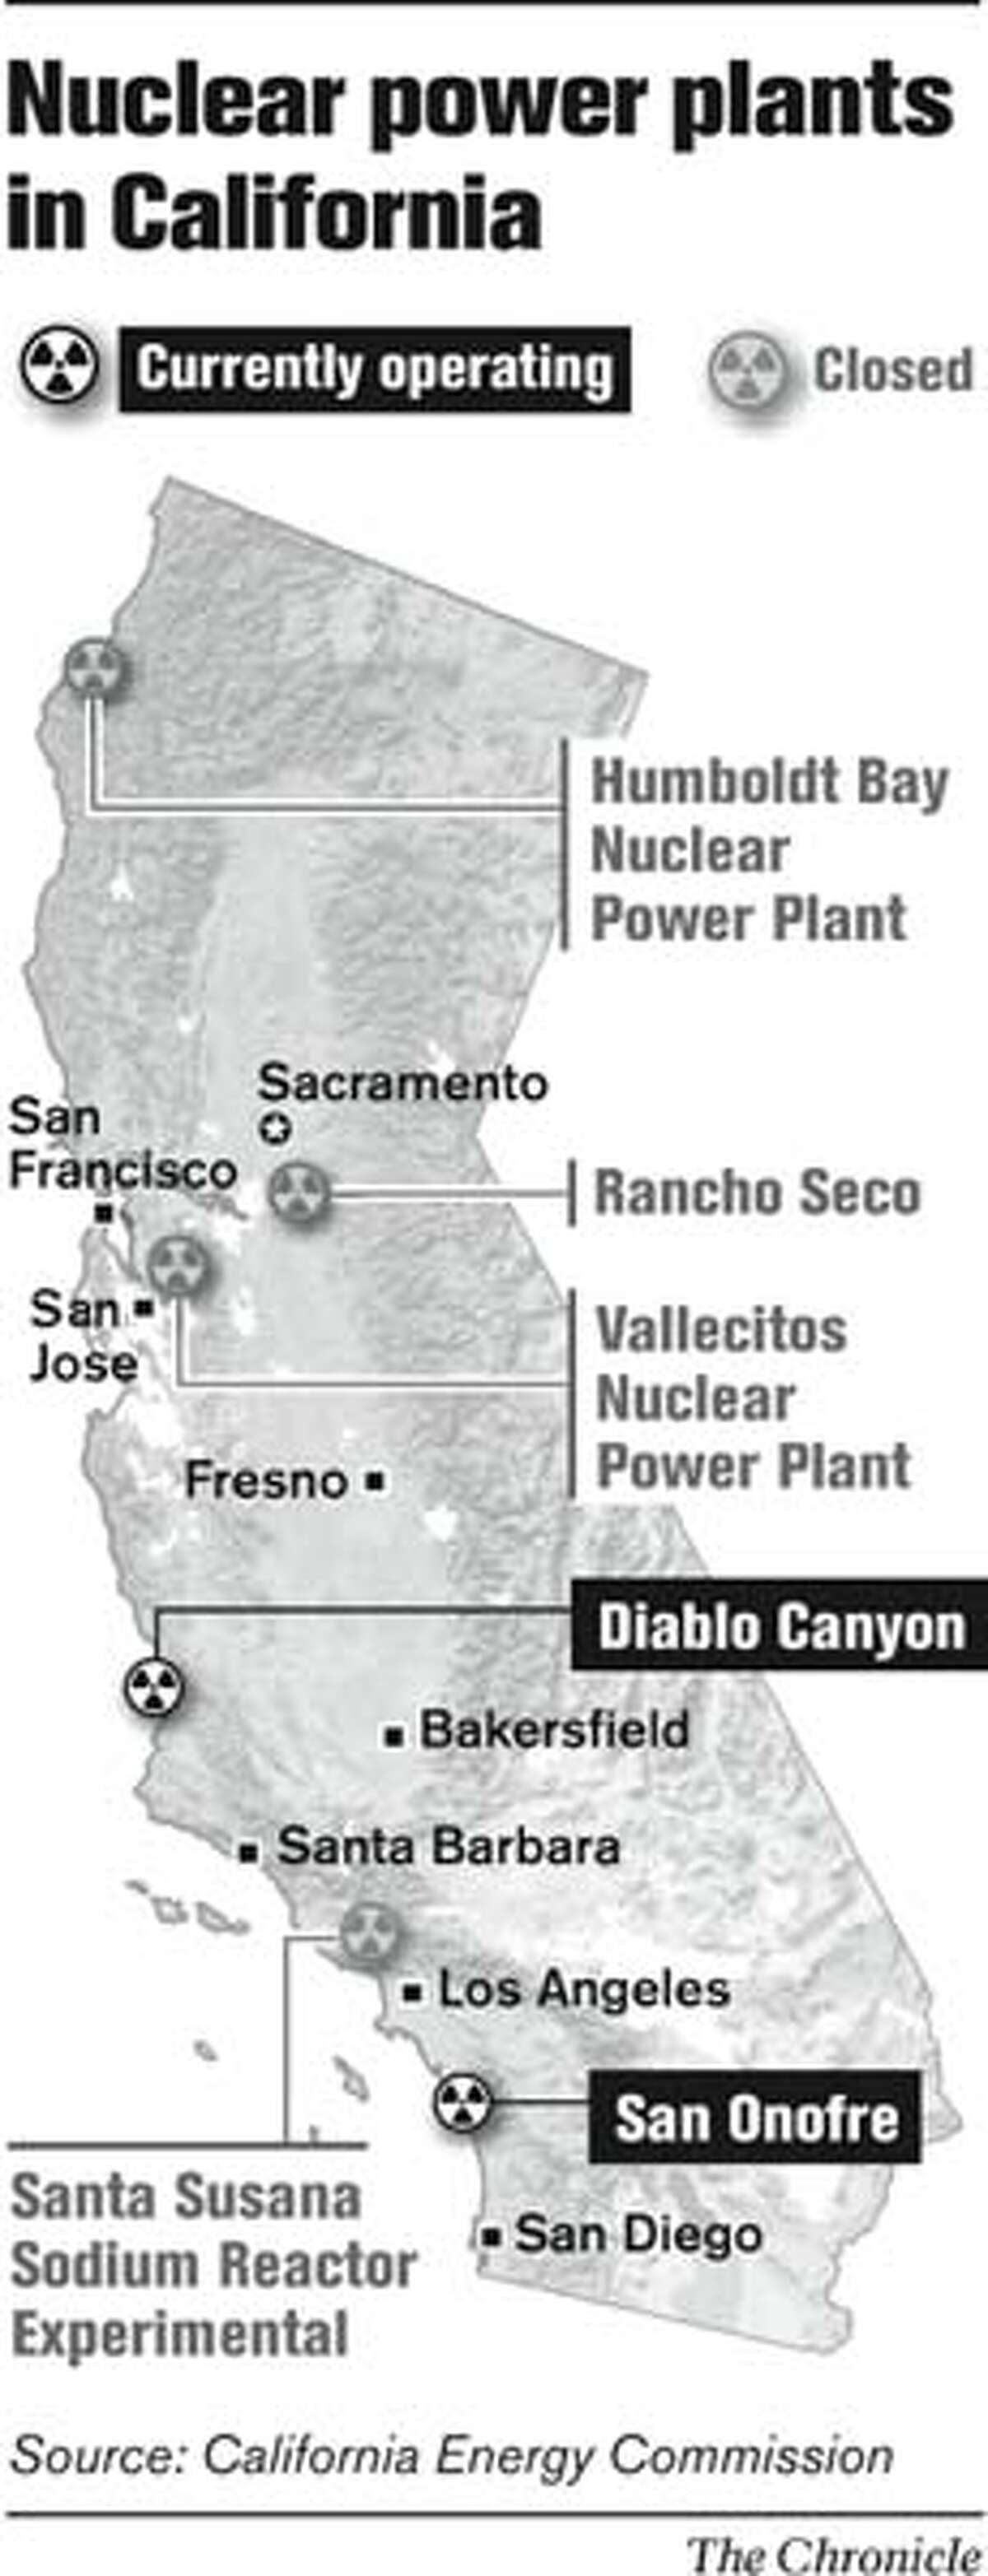 Nuclear Power Plants in California. Chronicle Graphic